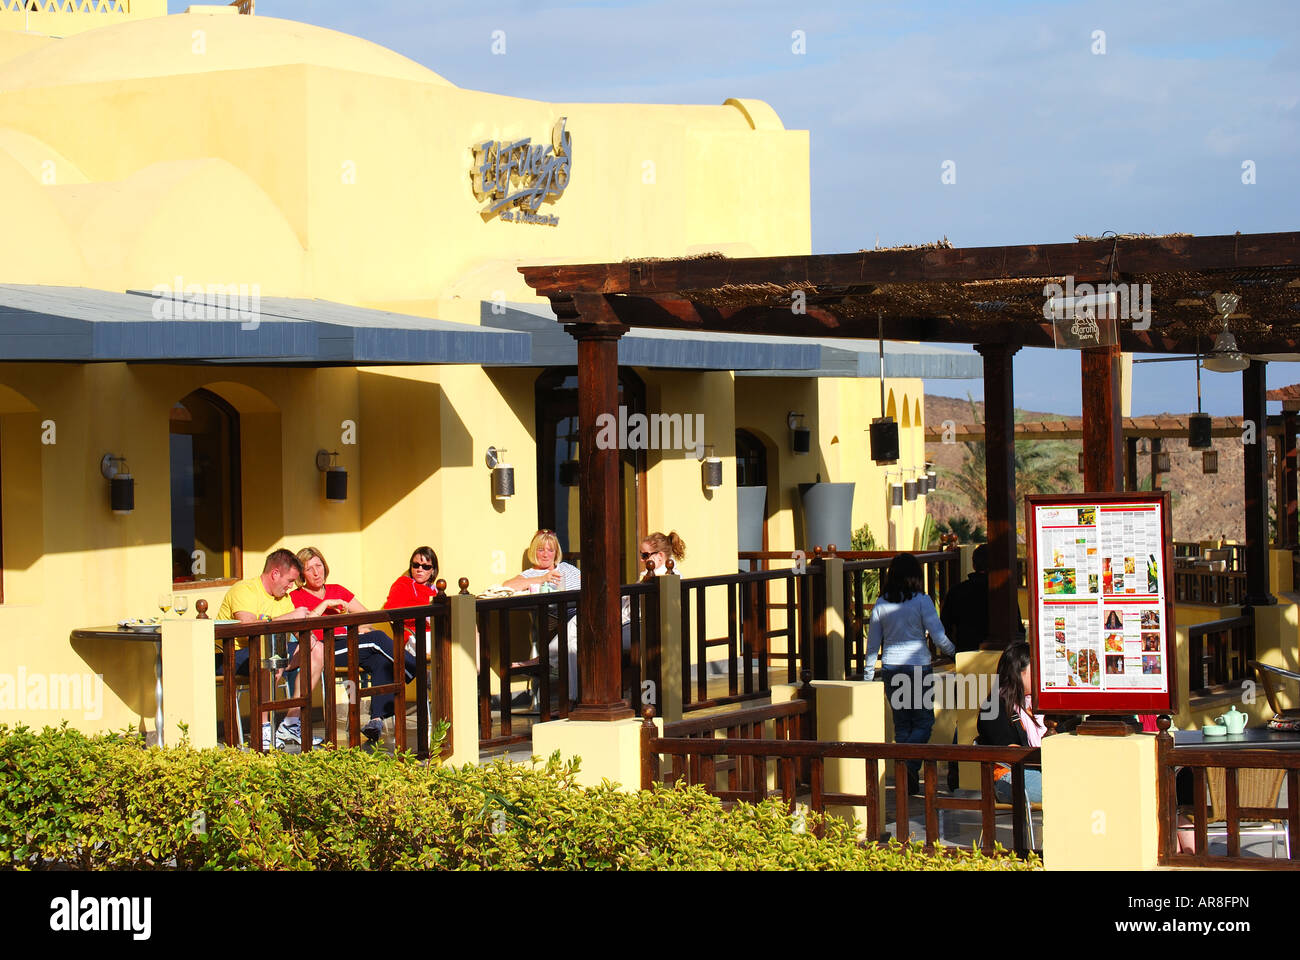 El Fuego cafe and Mexican Restaurant, Downtown village, Taba Heights, Sinai Peninsula, Republic of Egypt Stock Photo